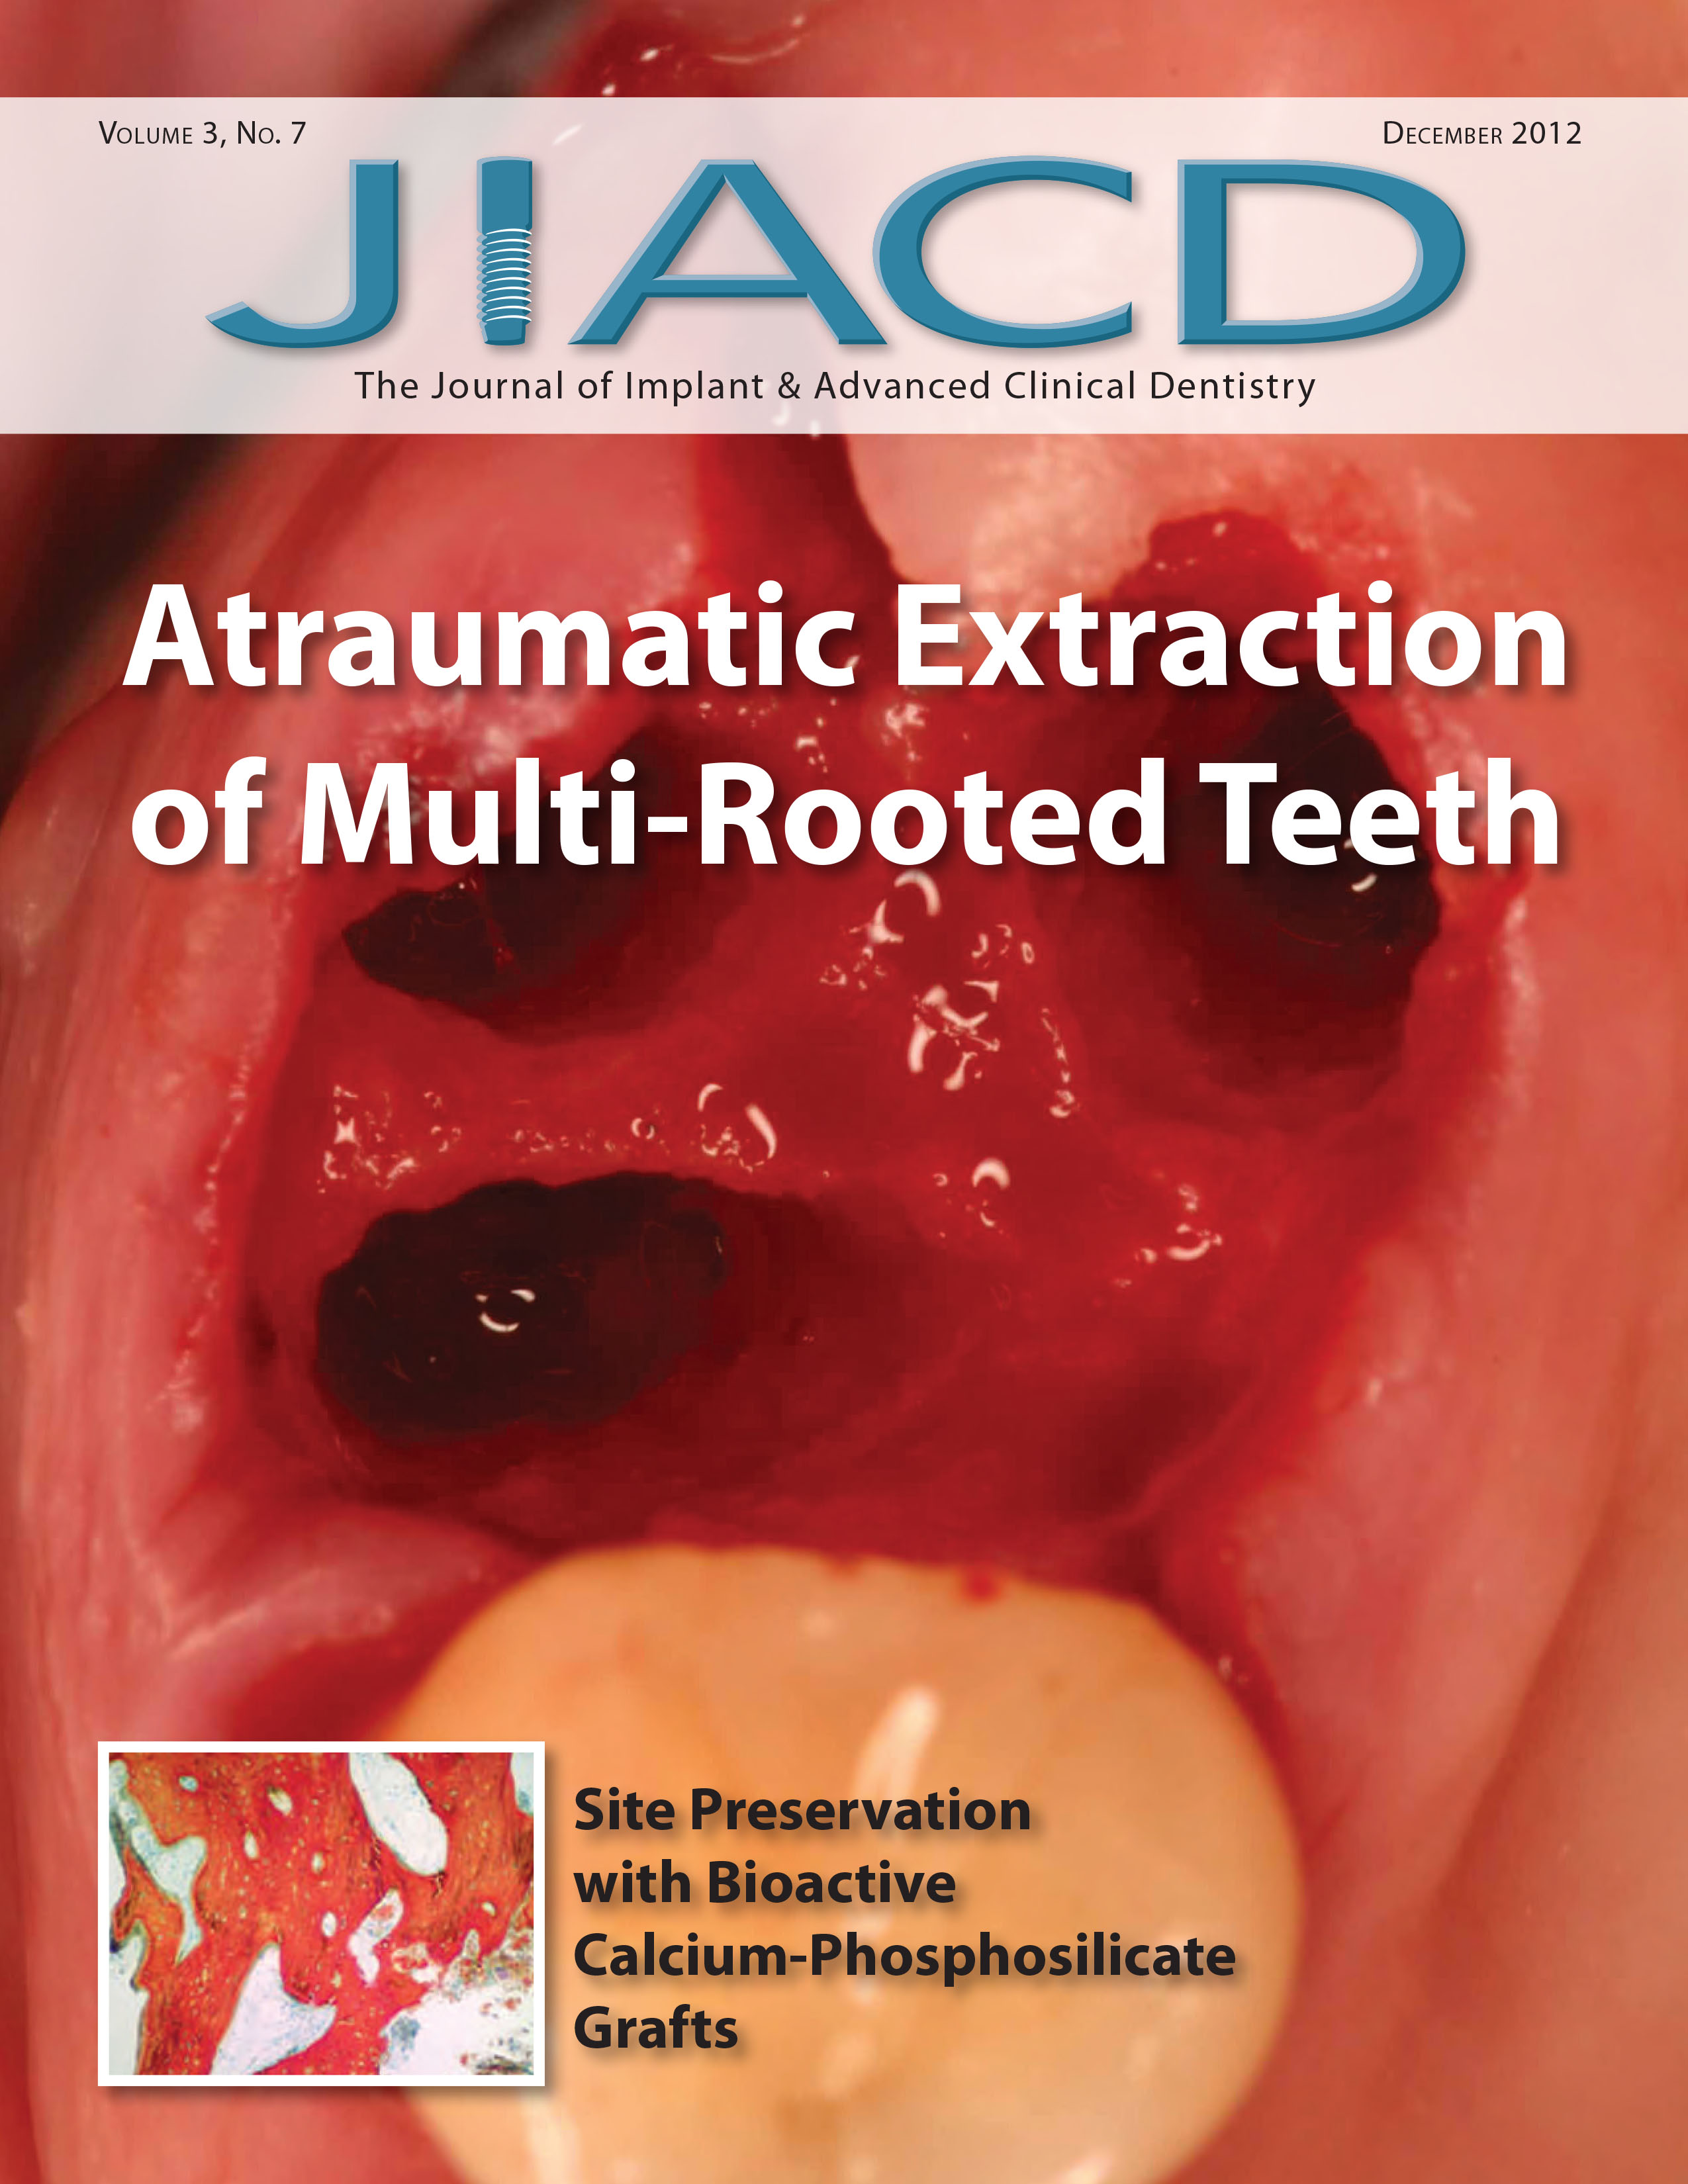 Atraumatic Extraction of Multi-Rooted Teeth Site Preservation